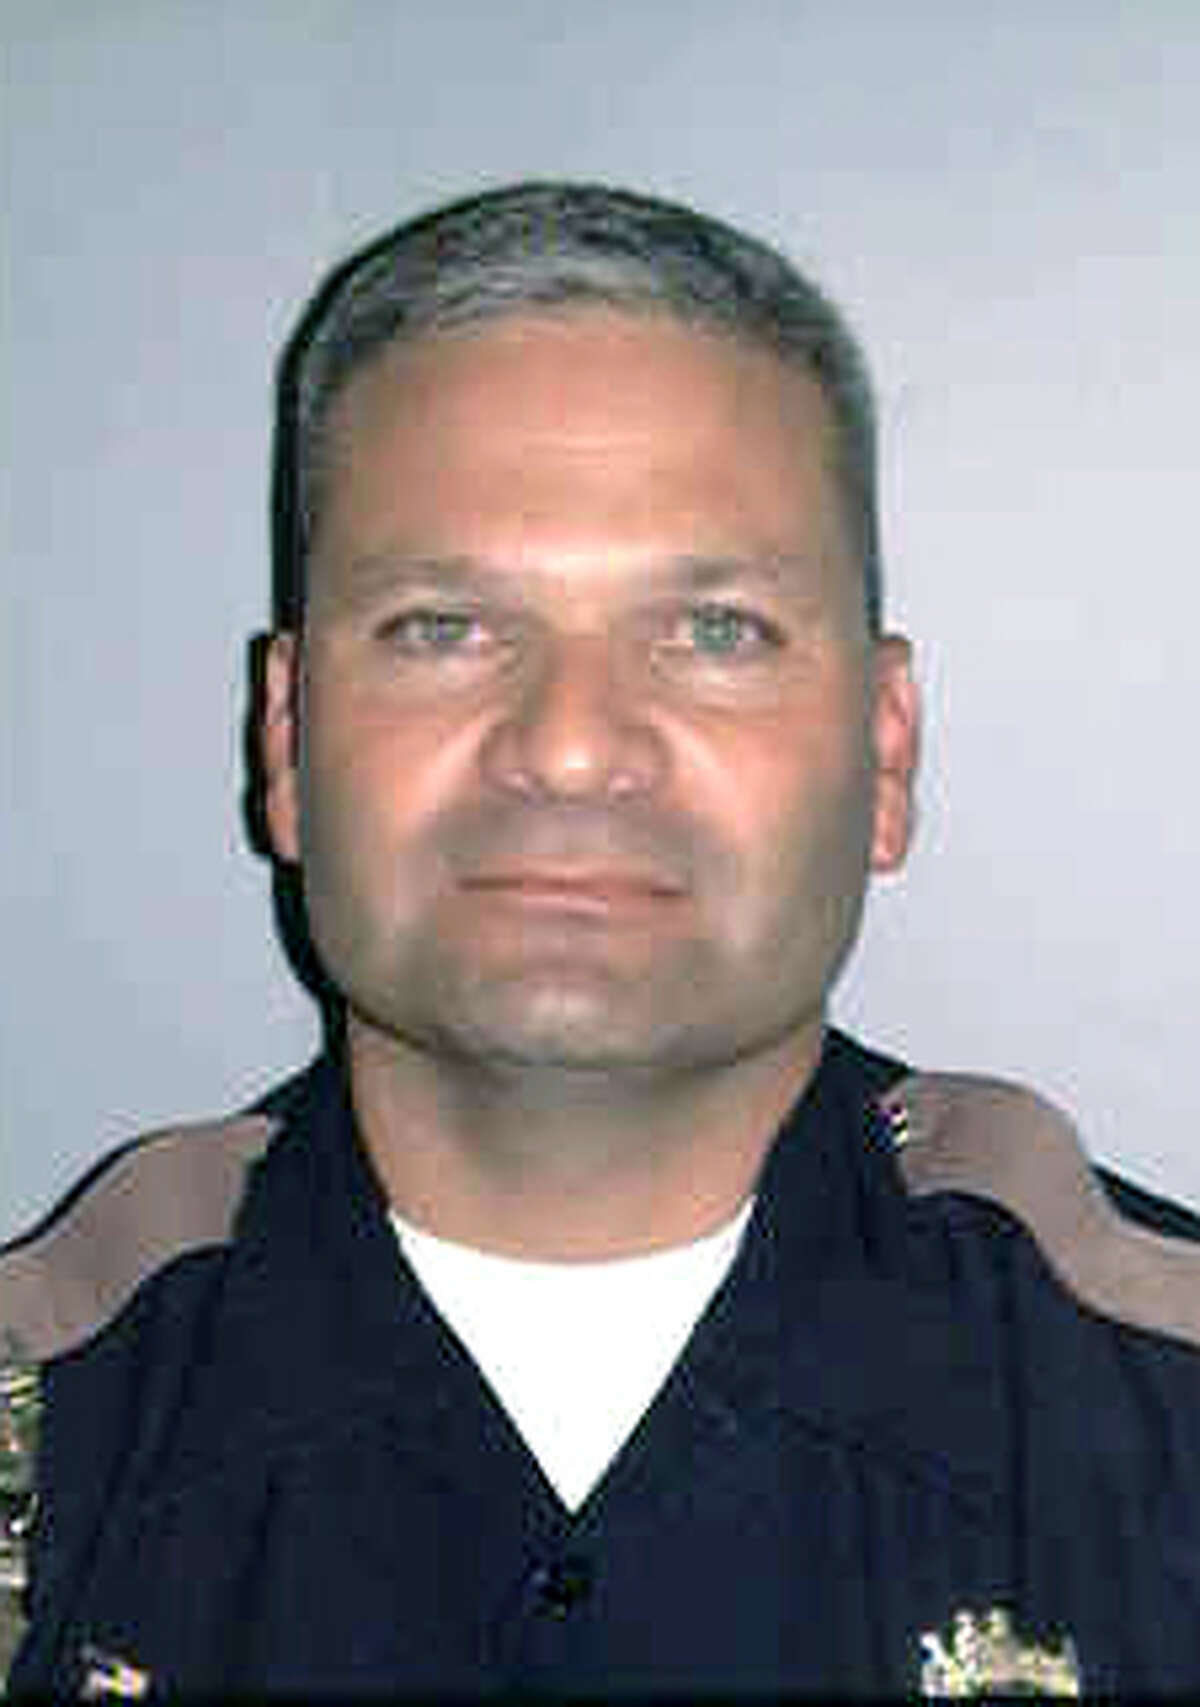 This undated picture provided by the Bexar County Sheriff's Office shows Bexar County Sgt. Kenneth Vann. The sherrif's deputy was shot and killed early May 28, 2011 at the intersection of Loop 410 and Rigsby Avenue in San Antonio, Texas when a car pulled up alongside his marked patrol car and ambushed him, opening fire with what officials believe was a semi automatic weapon. Vann, 48, was a 24 year veteran of the department. He is the first deputy killed in the line of duty in the department since 2003. (AP Photo/Bexar County Sheriff's Office via The San Antonio Express-News)